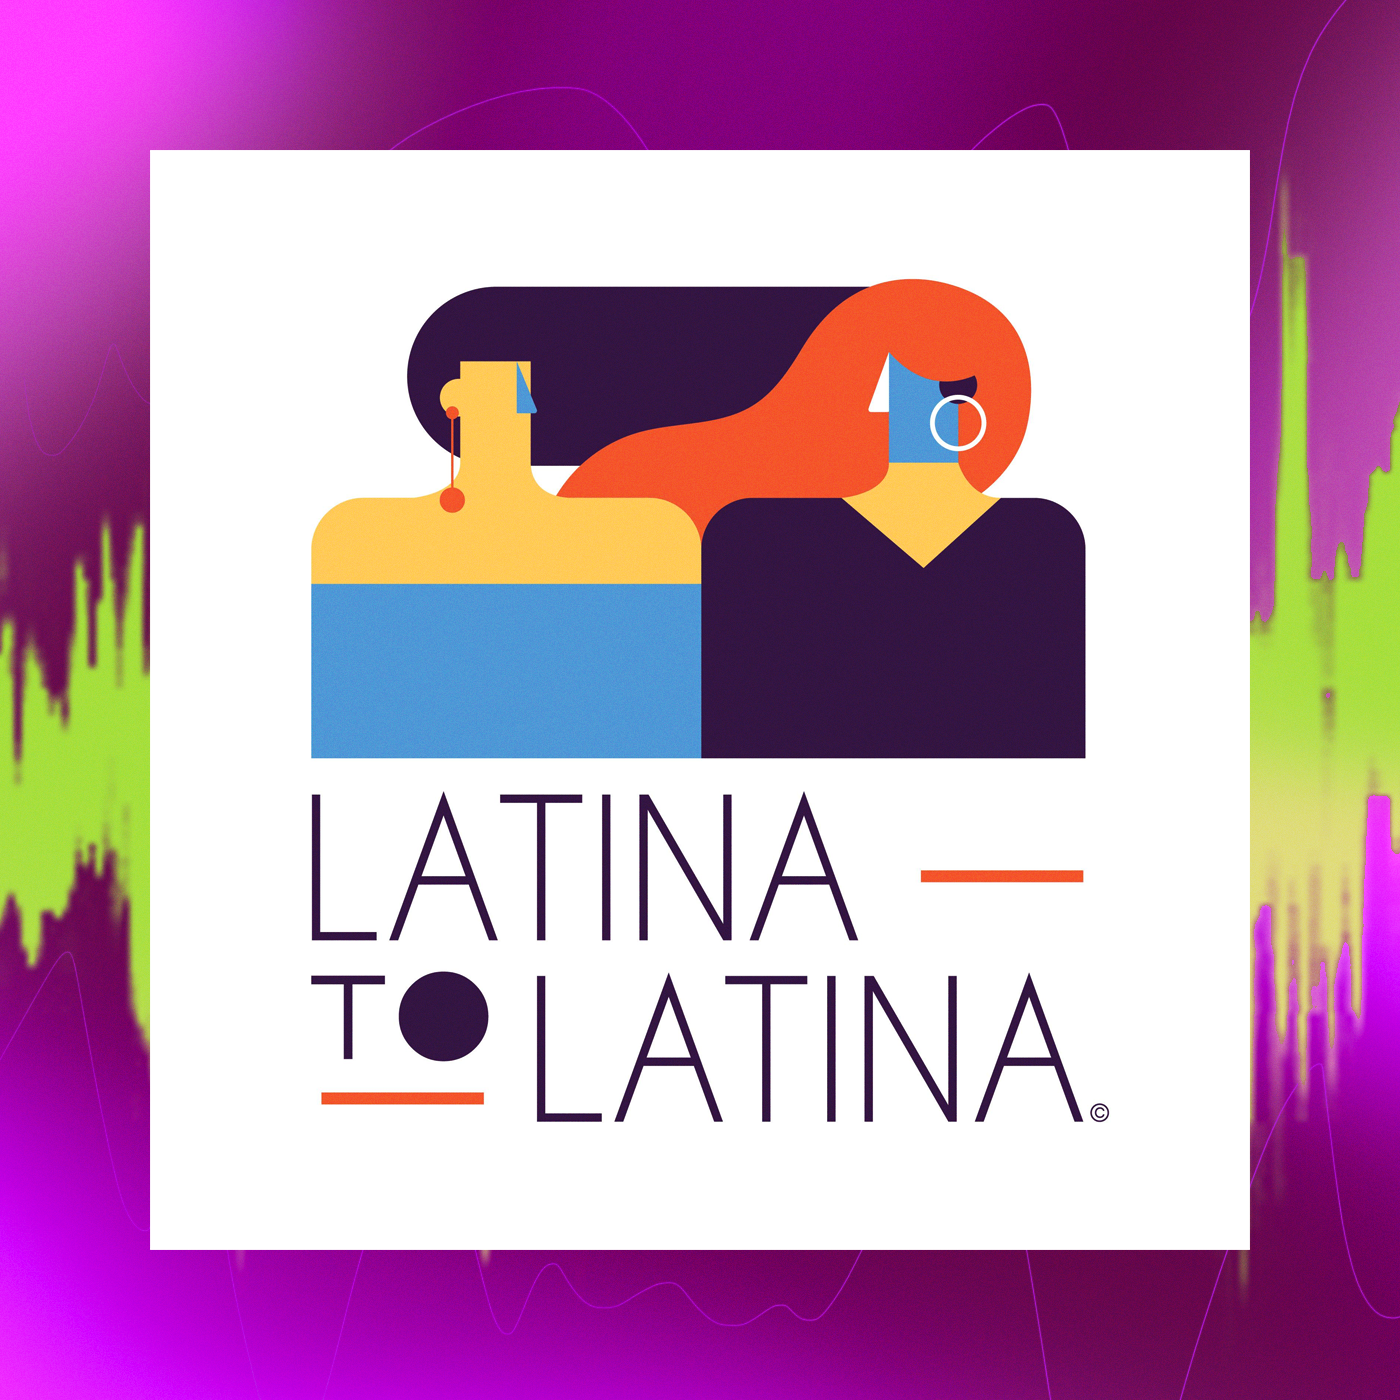 Podcast Recommendations: Empowering Audio Content by Latinos